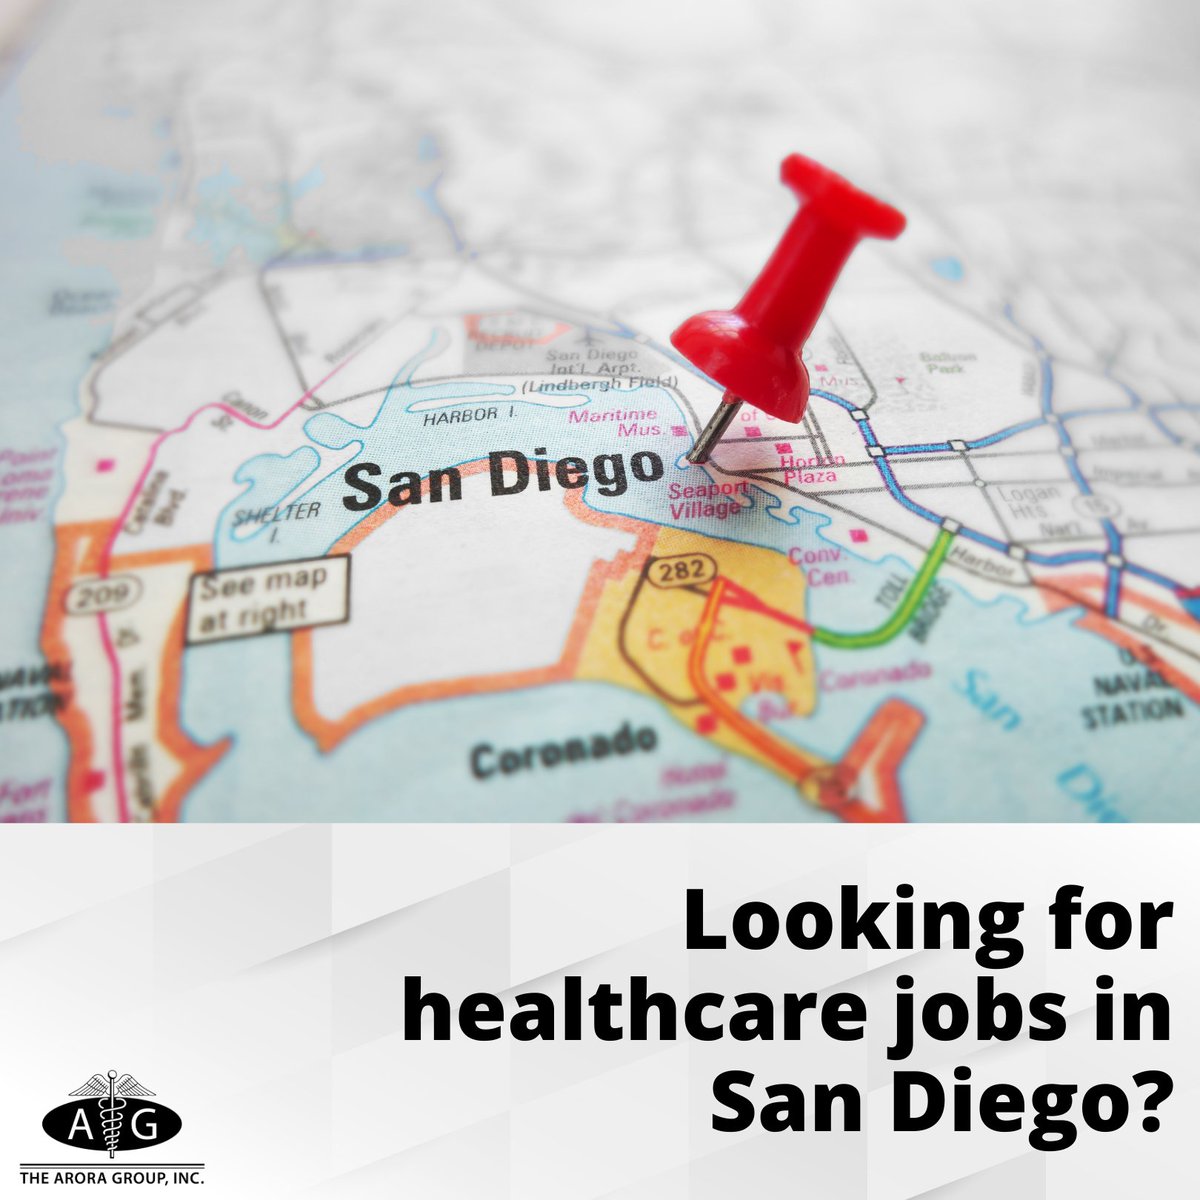 Join the growing healthcare industry in San Diego with numerous open job opportunities waiting for you! Browse here: nsl.ink/abxq

#AroraGroup #Healthcarejobs #MilitaryHospitals #SanDiegojobs #CaliforniaJobs #Physicianjobs #Nursingjobs #Alliedhealth #Militarycontract